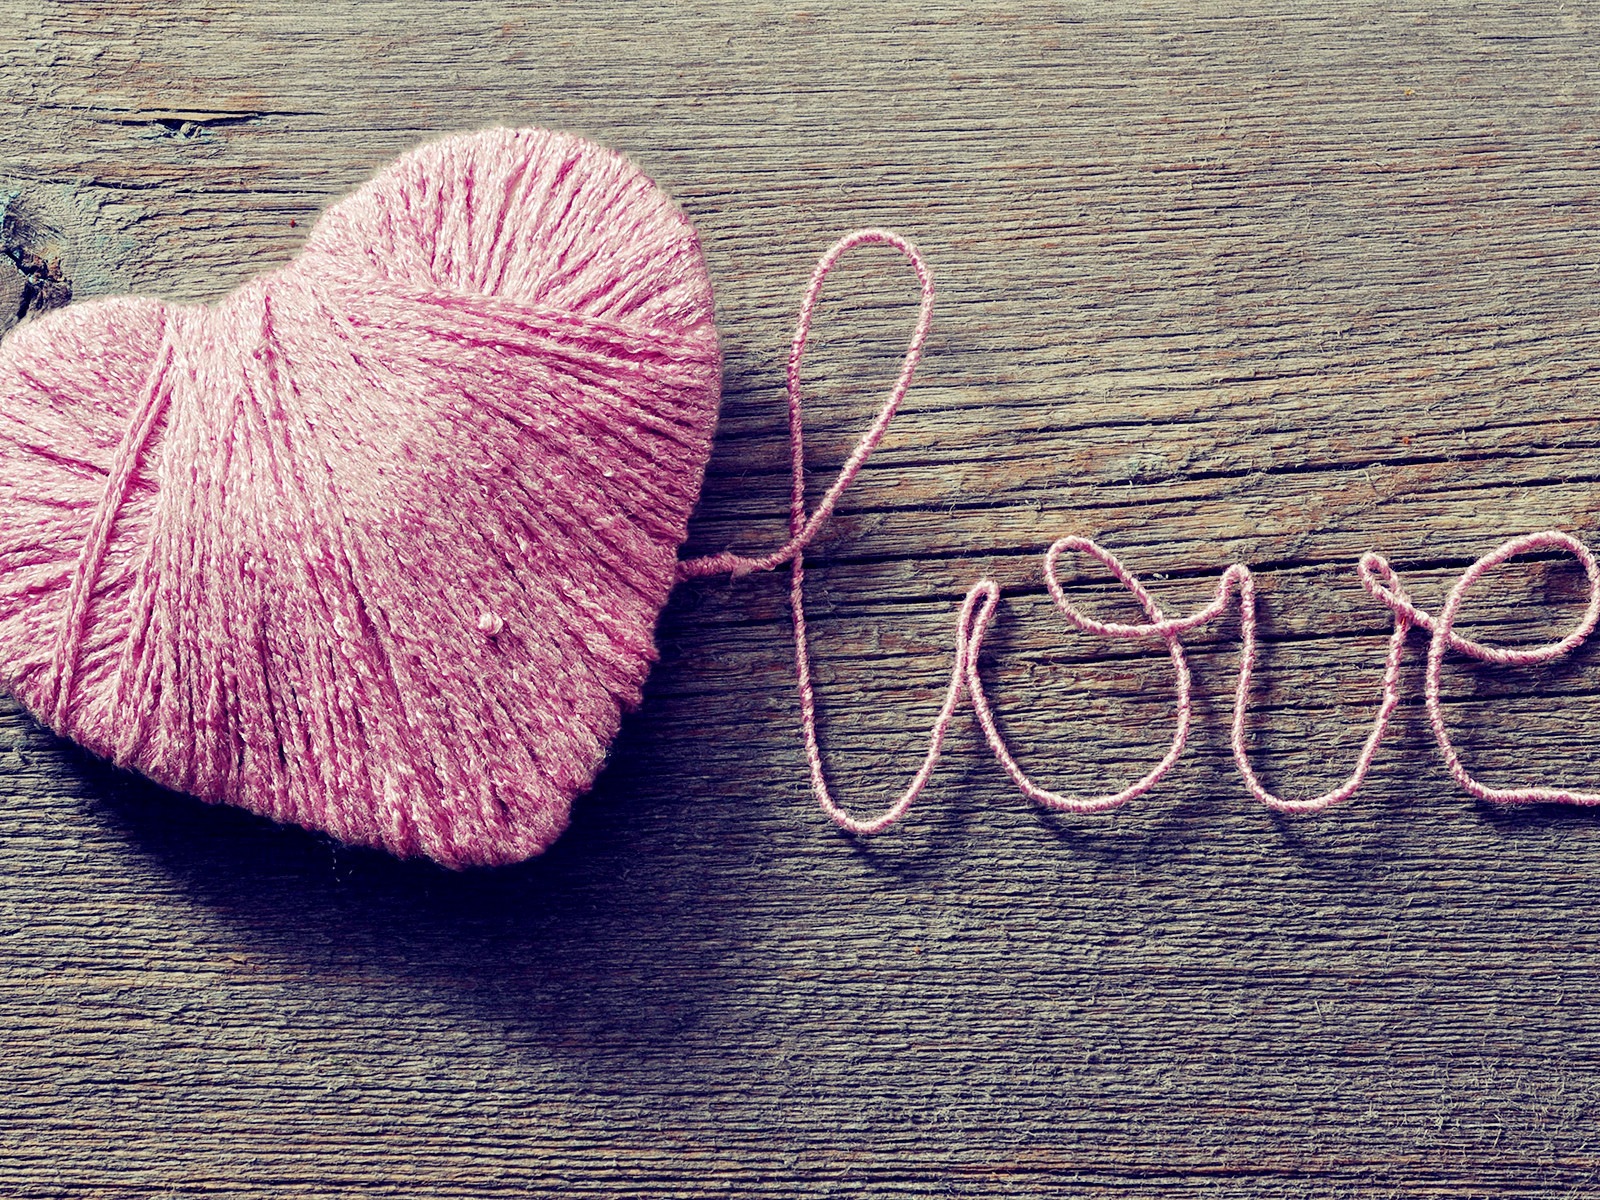 The theme of love, creative heart-shaped HD wallpapers #10 - 1600x1200